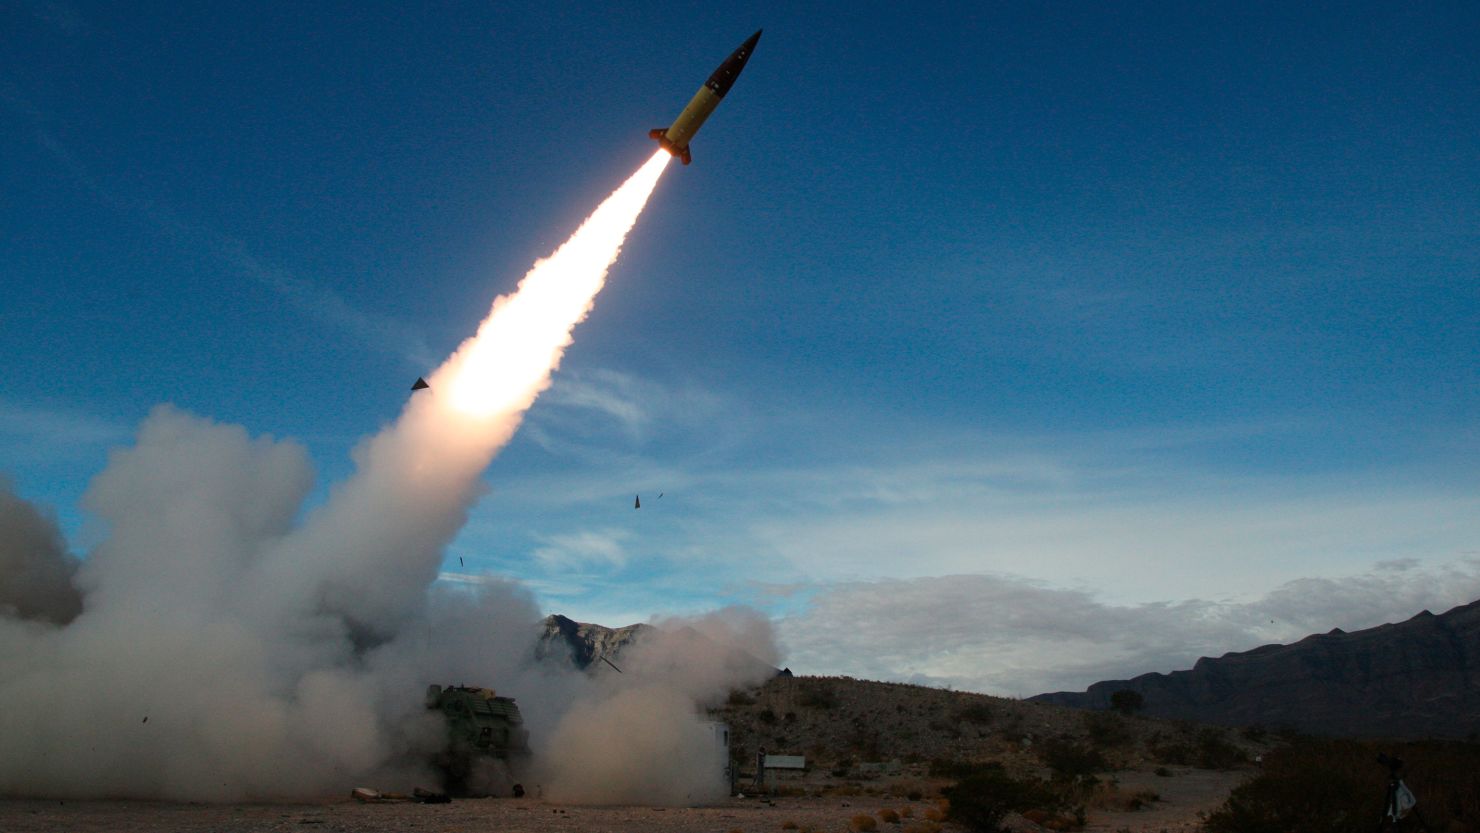 In this image provided by the US Army, soldiers from the 3rd Battalion, 321st Field Artillery Regiment of the 18th Field Artillery Brigade out of Fort Bragg, North Carolina, conduct live fire testing at White Sands Missile Range, New Mexico, in December 2021, of early versions of the Army Tactical Missile System. 